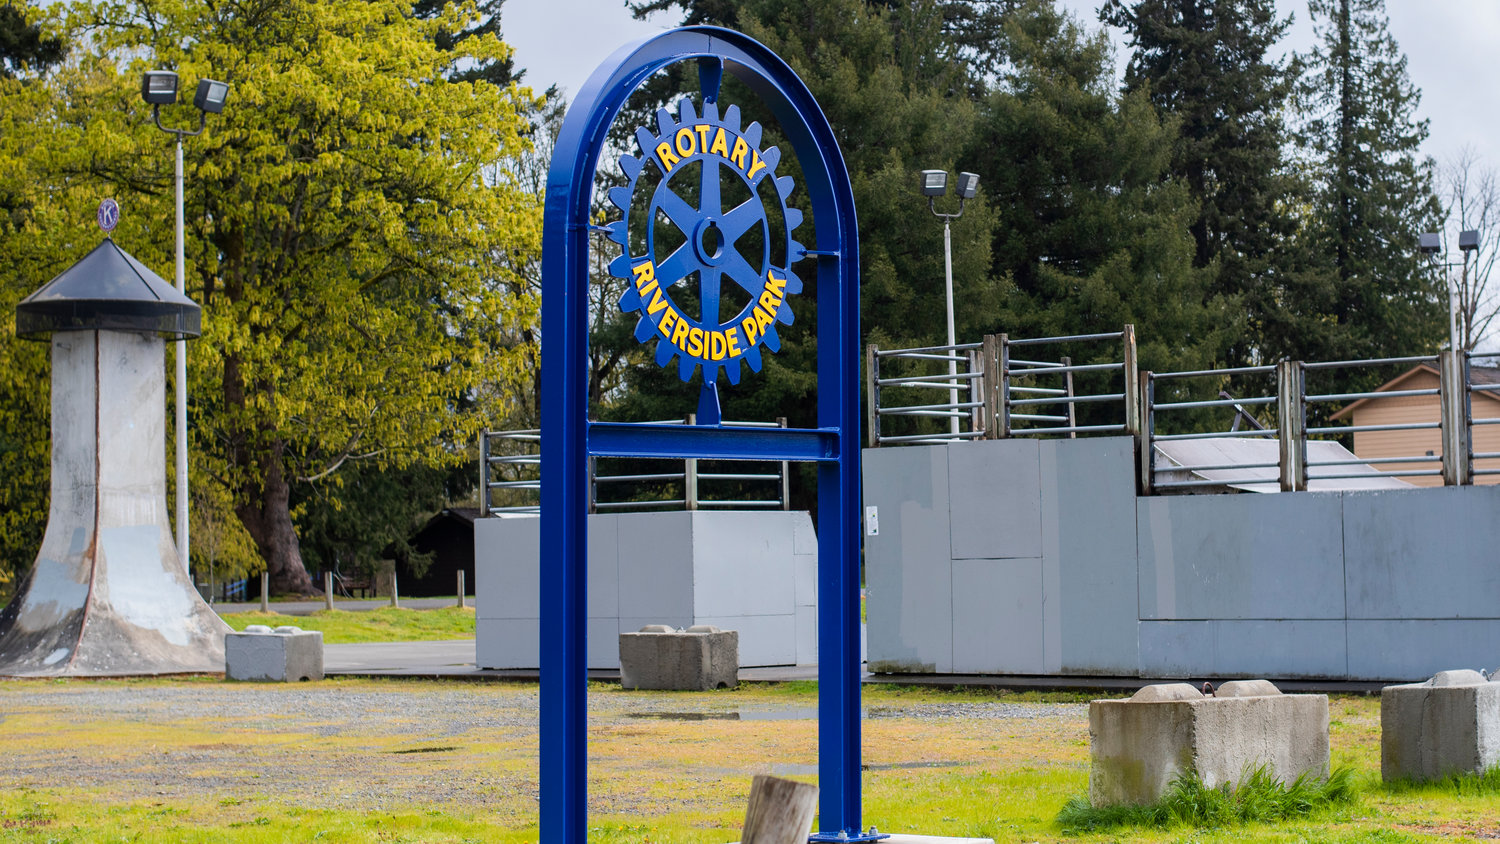 Rotary Riverside Park is located along Lowe Street in Centralia.